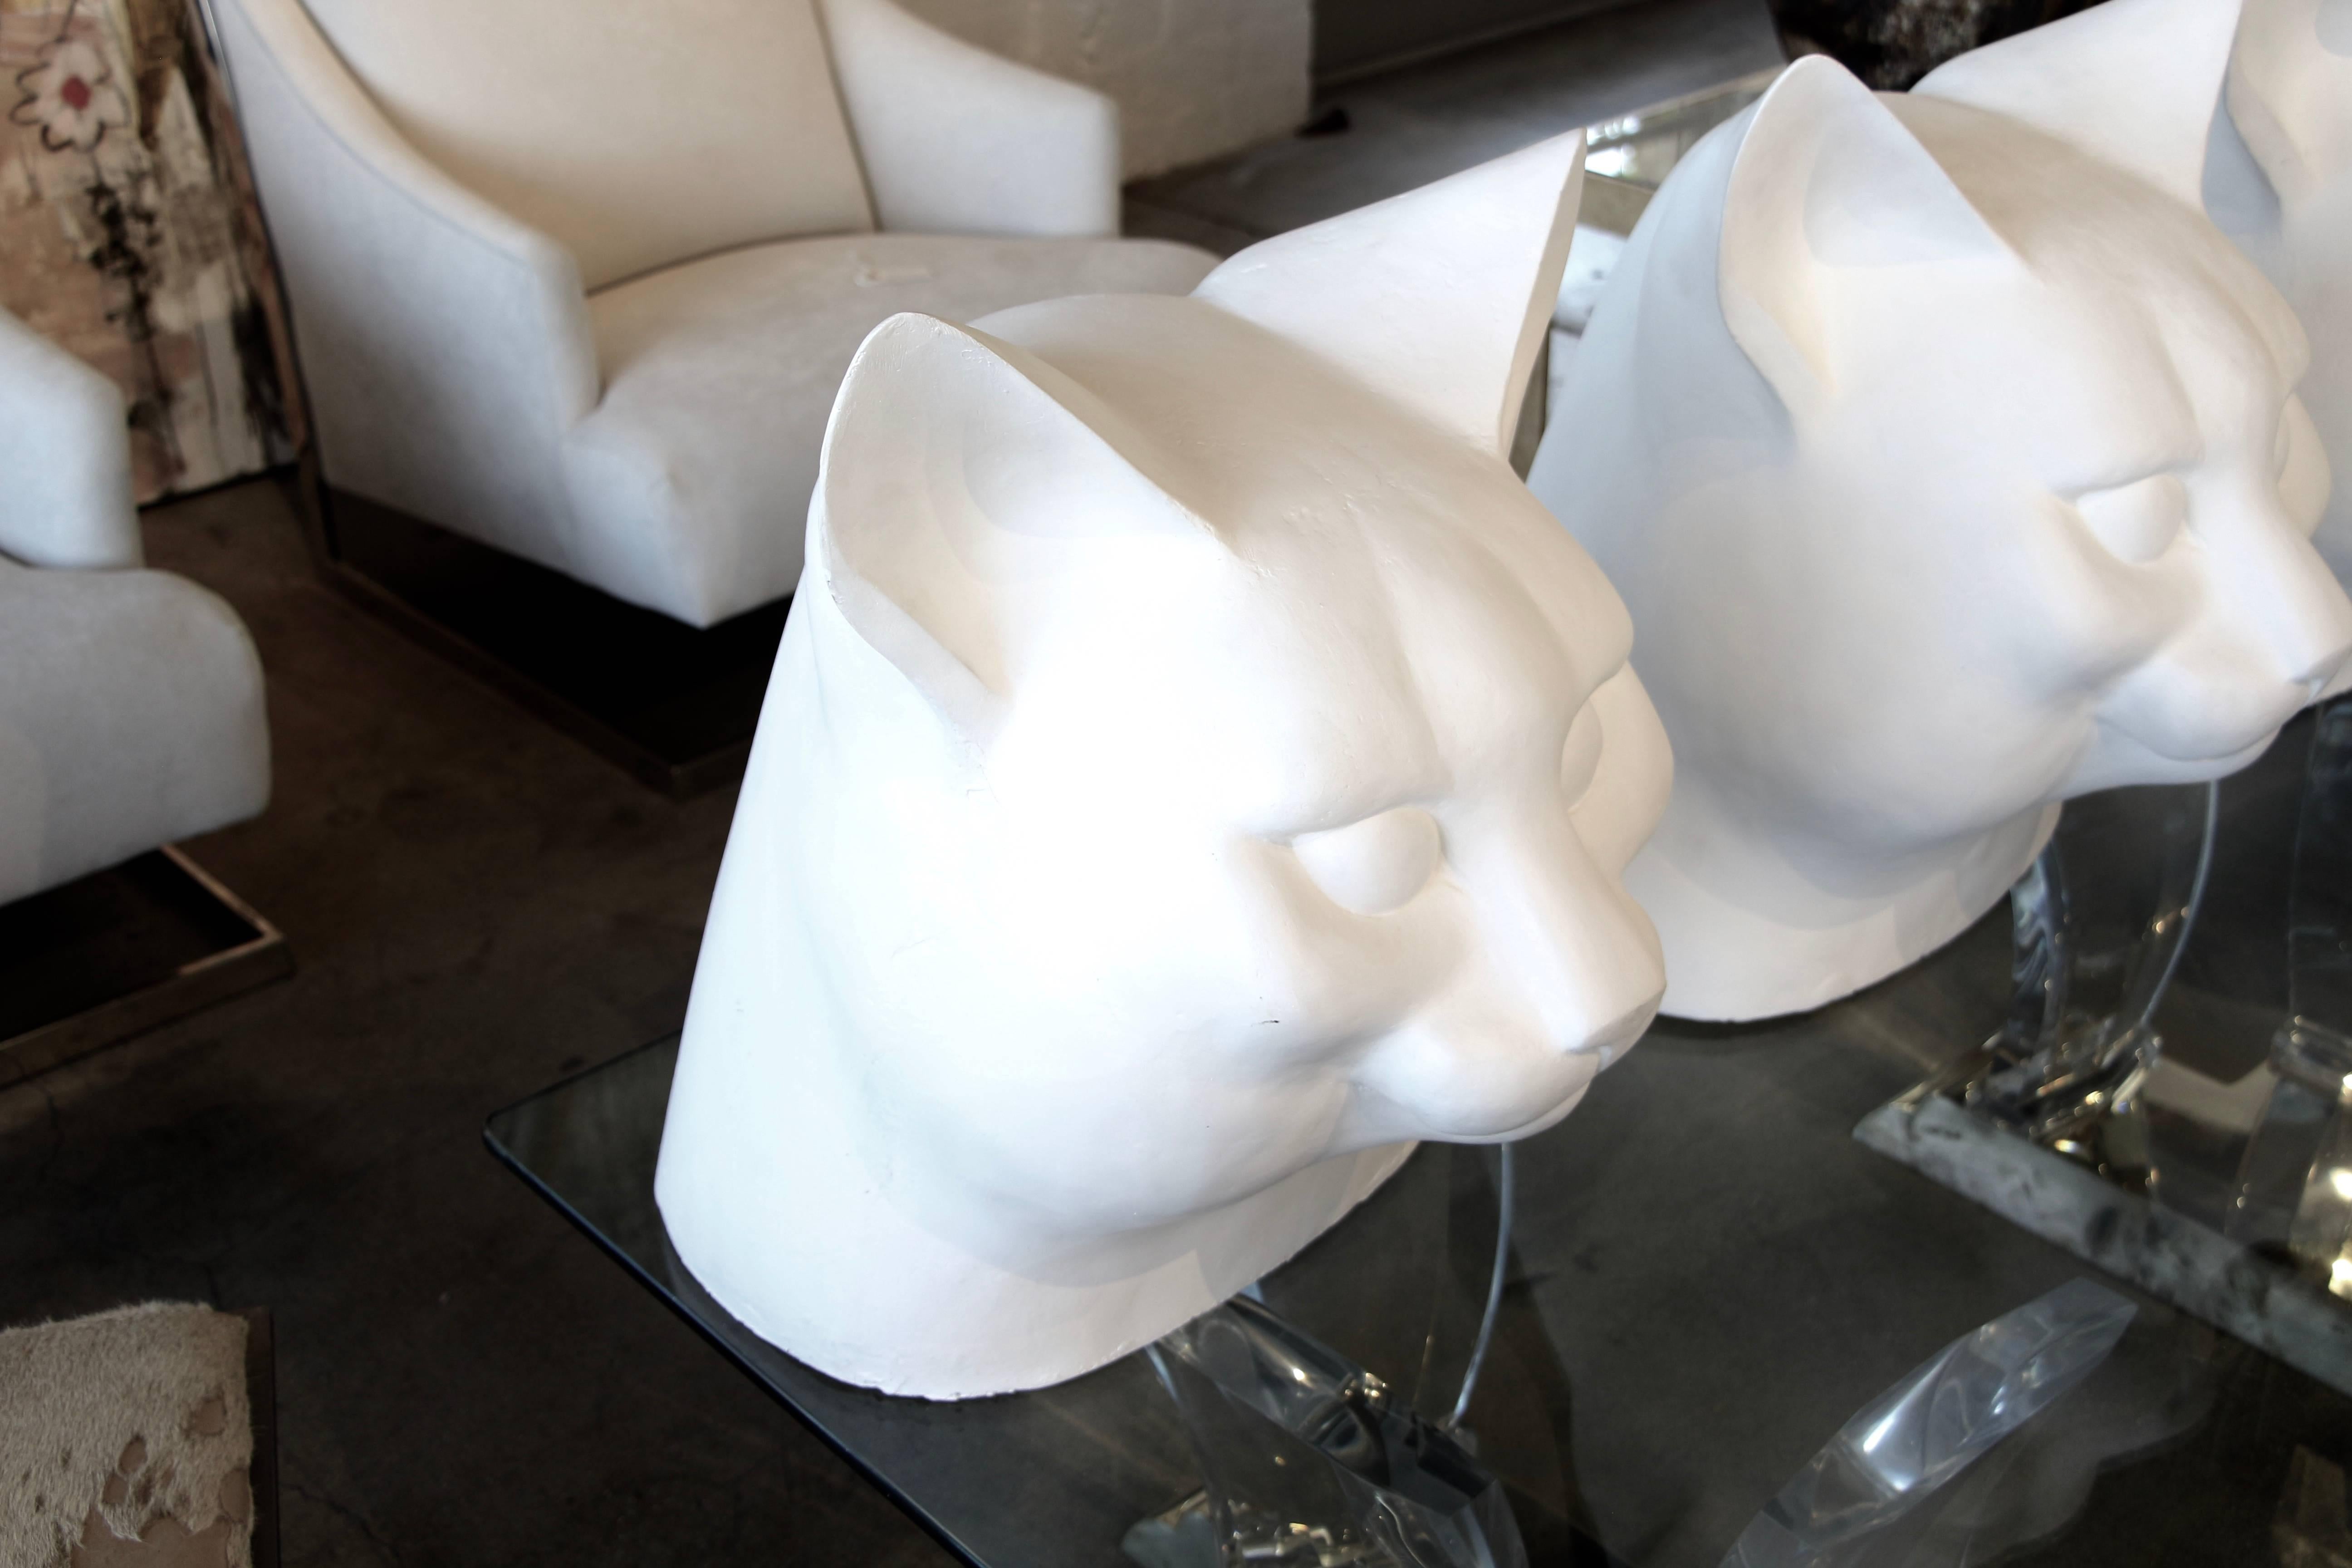 We purchased these cat bust from an estate in the desert here who had them commissioned from the artist directly. Apparently the original is in the royal Academy in London. The estate wanted a copy and commissioned this set in fiberglass, which has